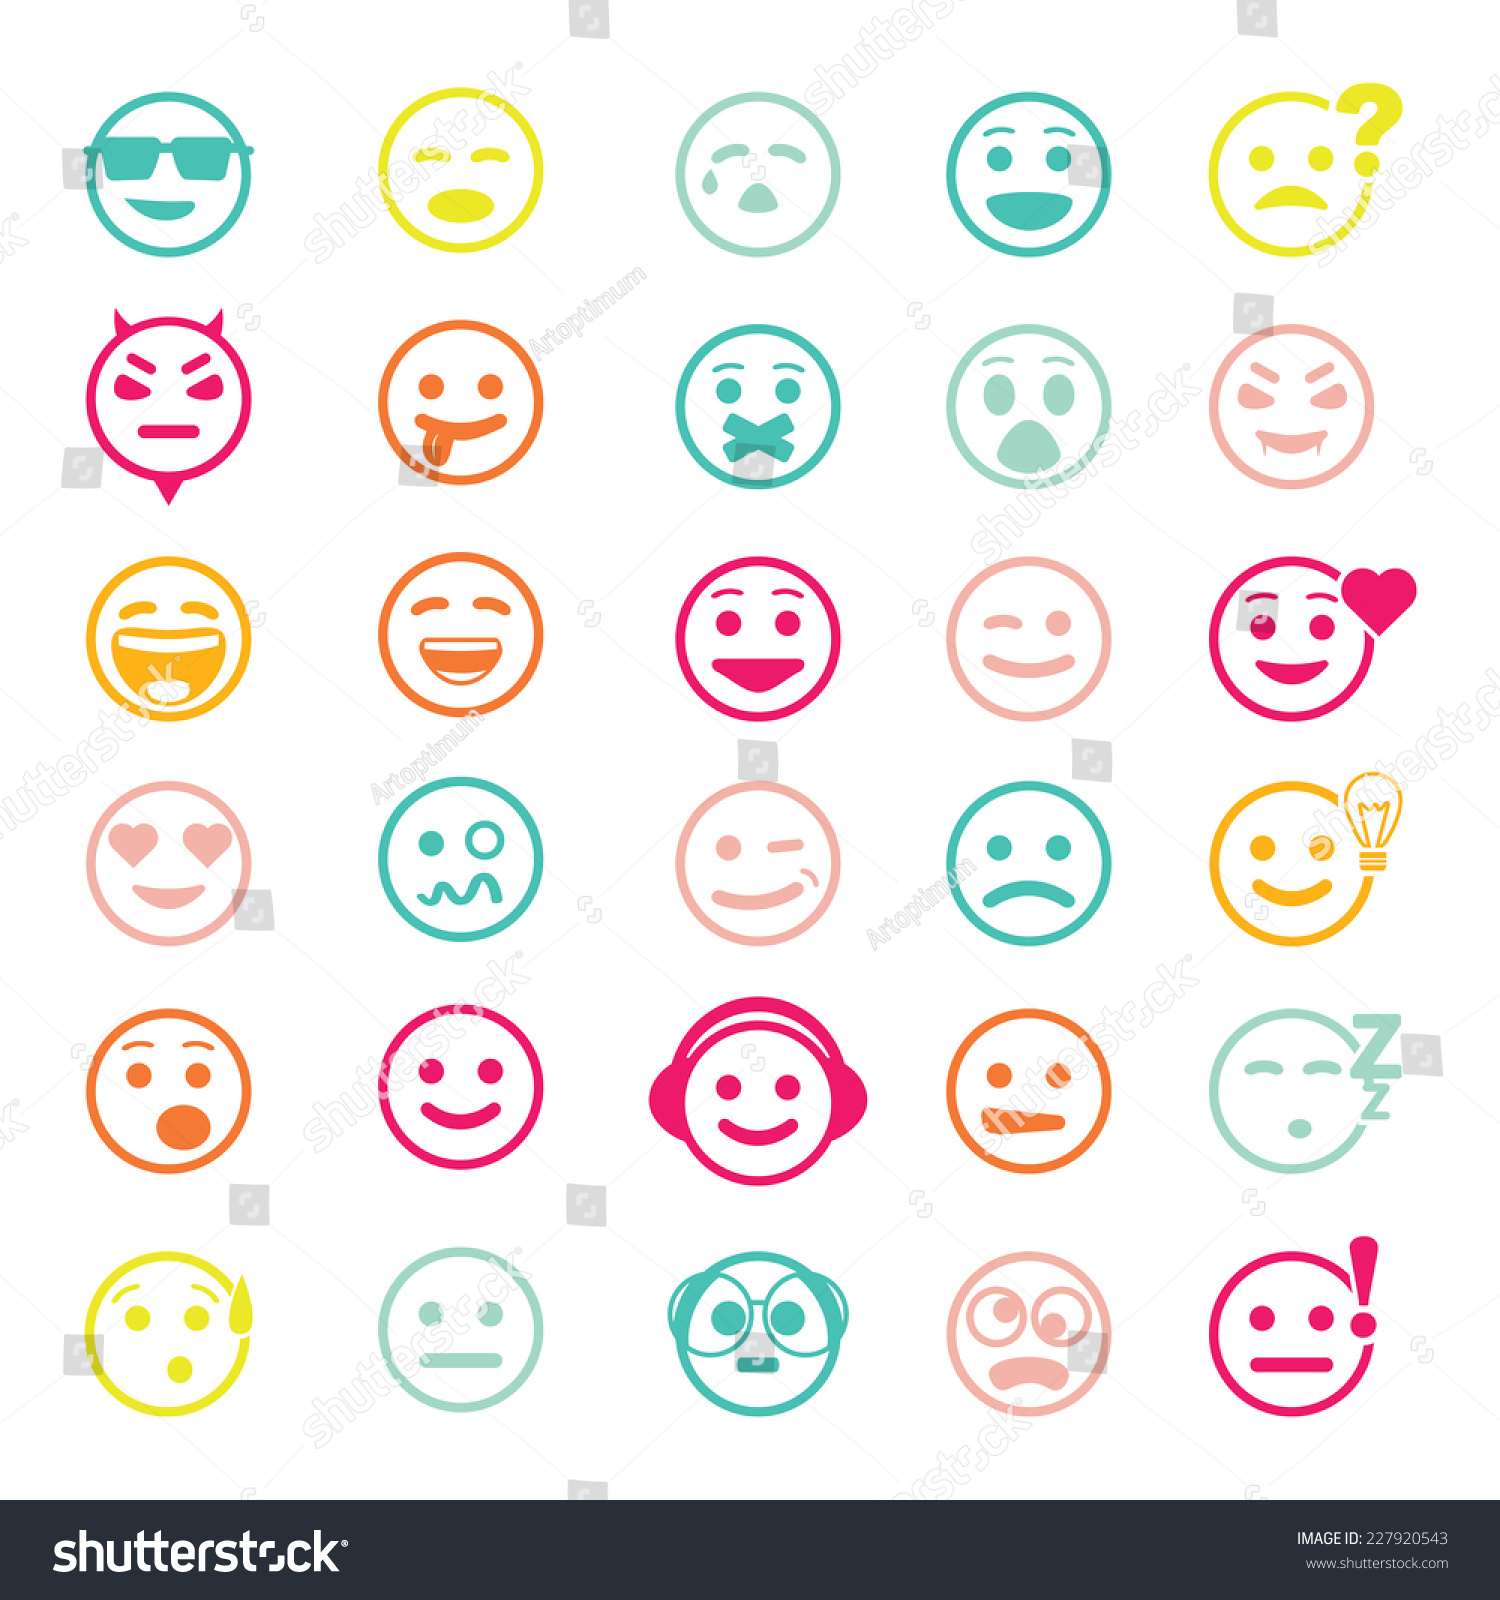 Color Vector Icons Smiley Faces On Stock Vector (Royalty Free ...